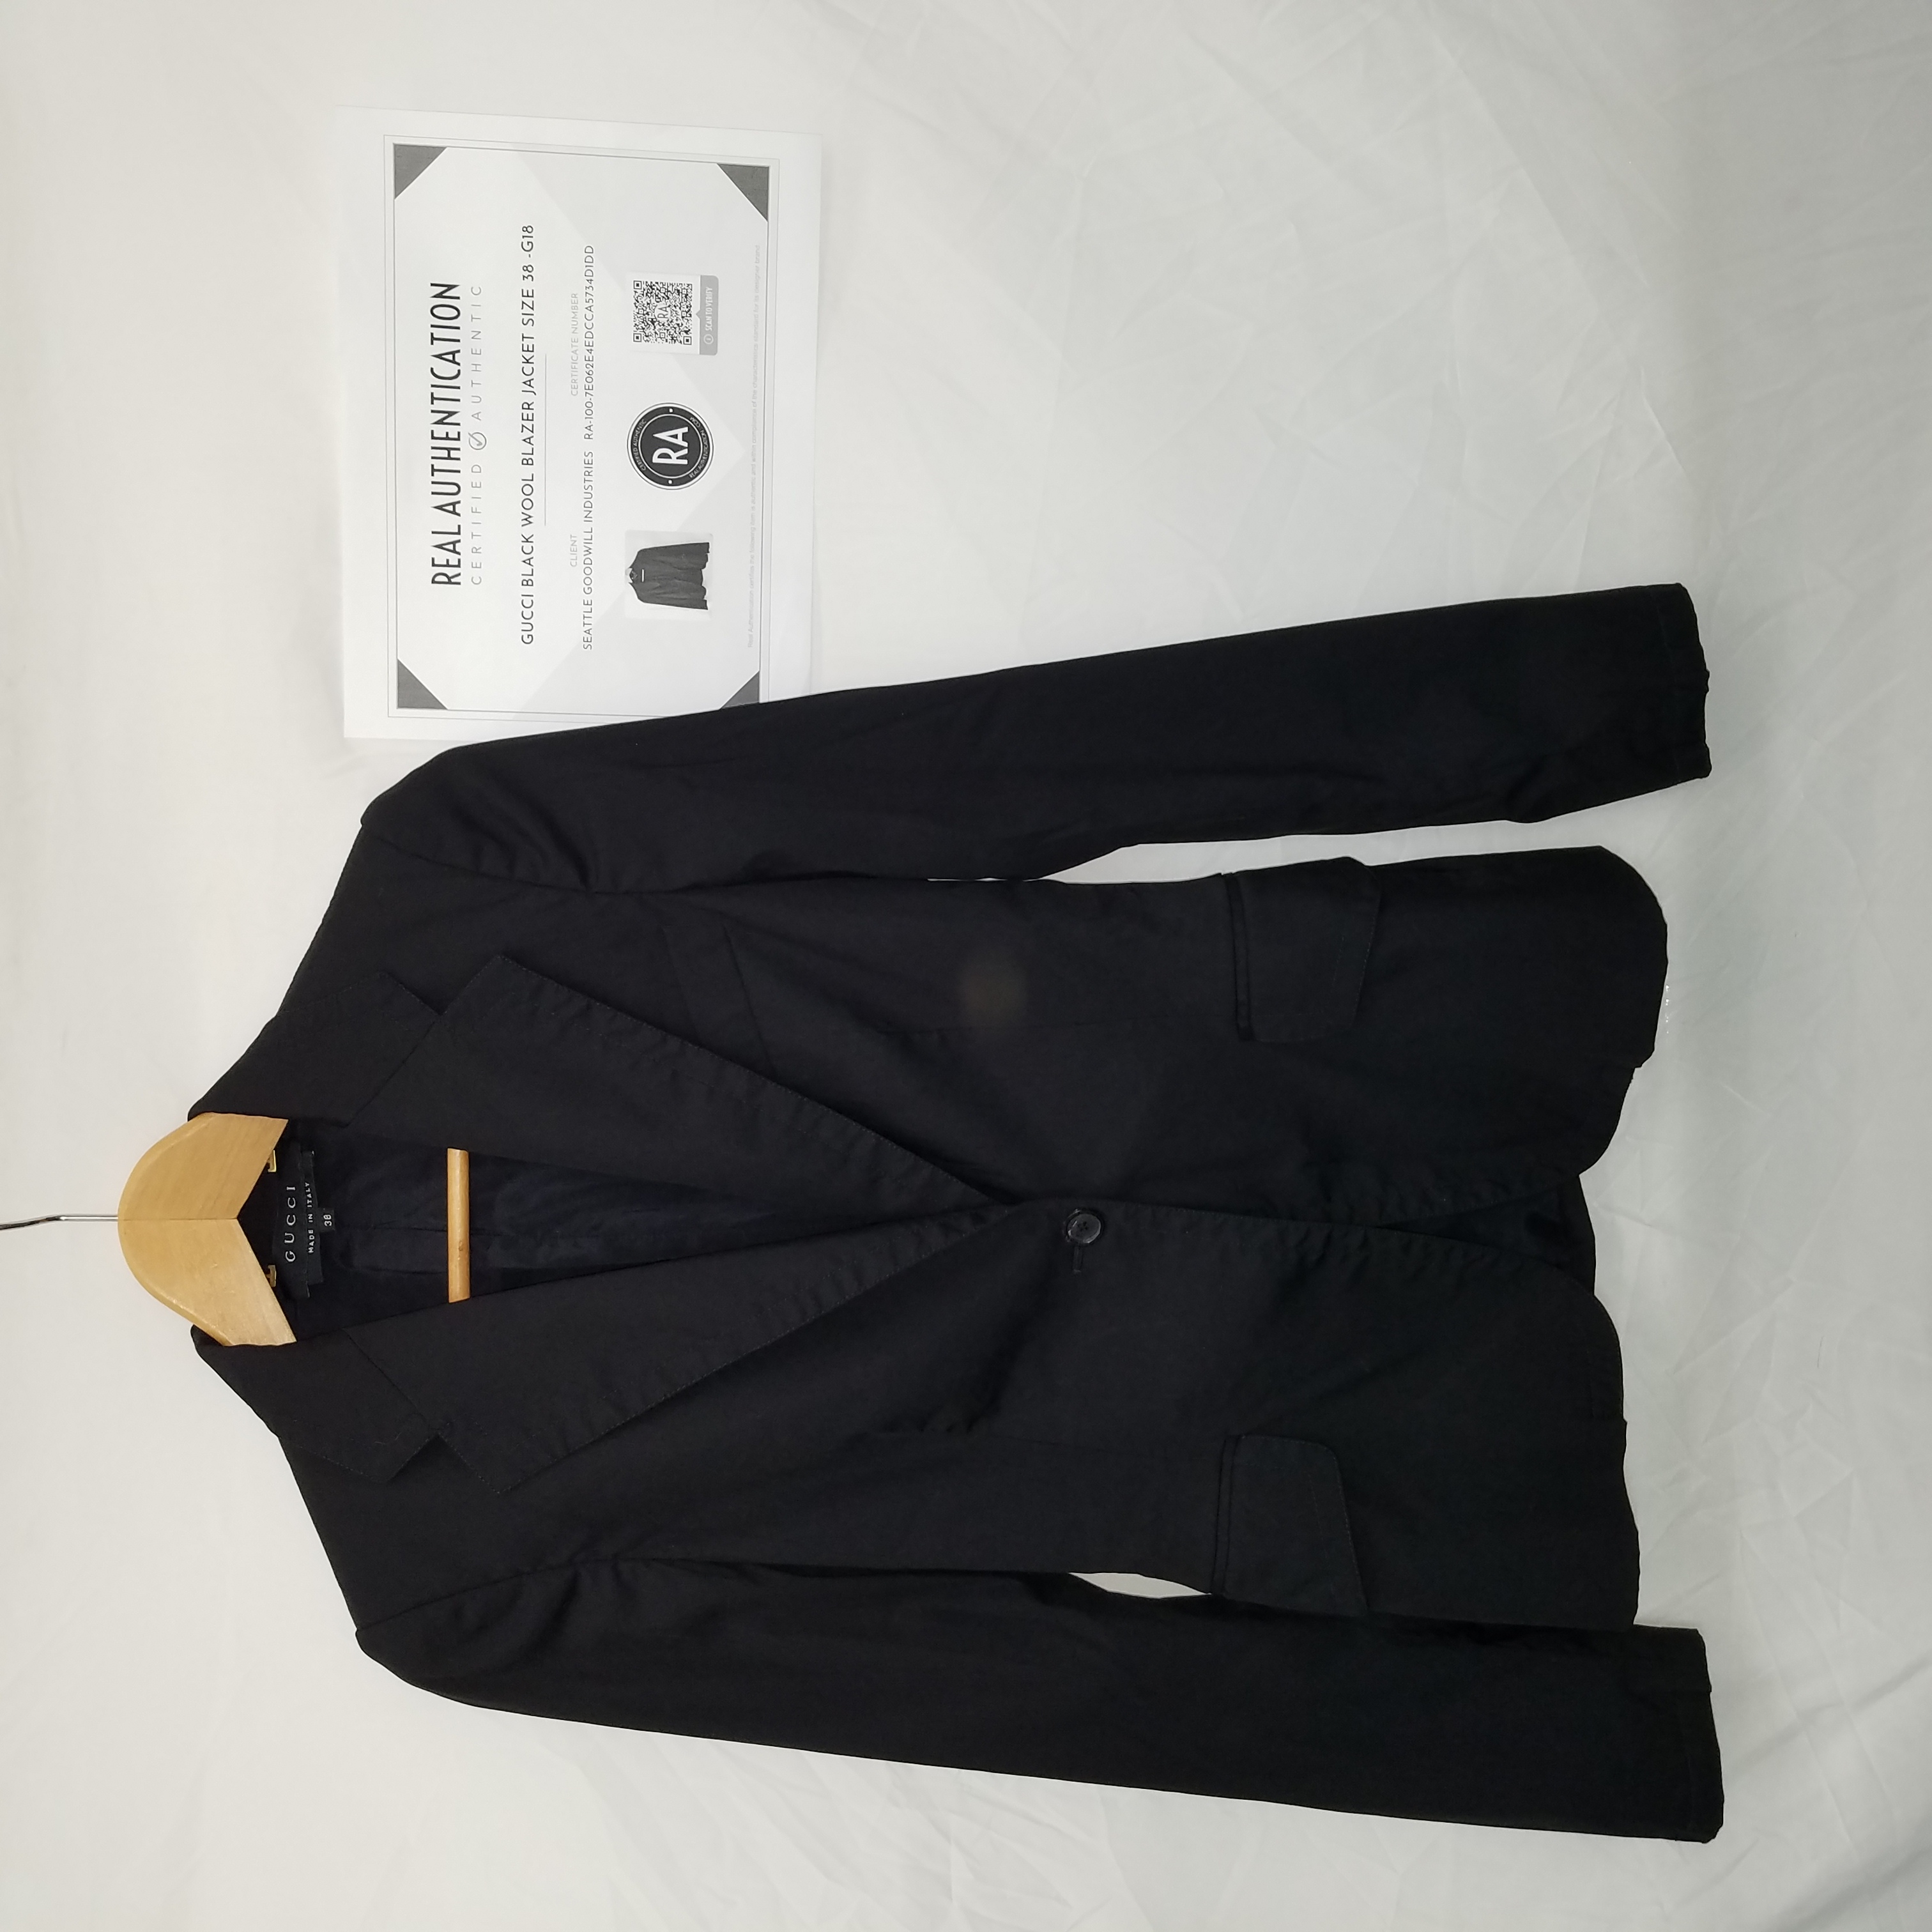 Gucci Authenticated Jacket